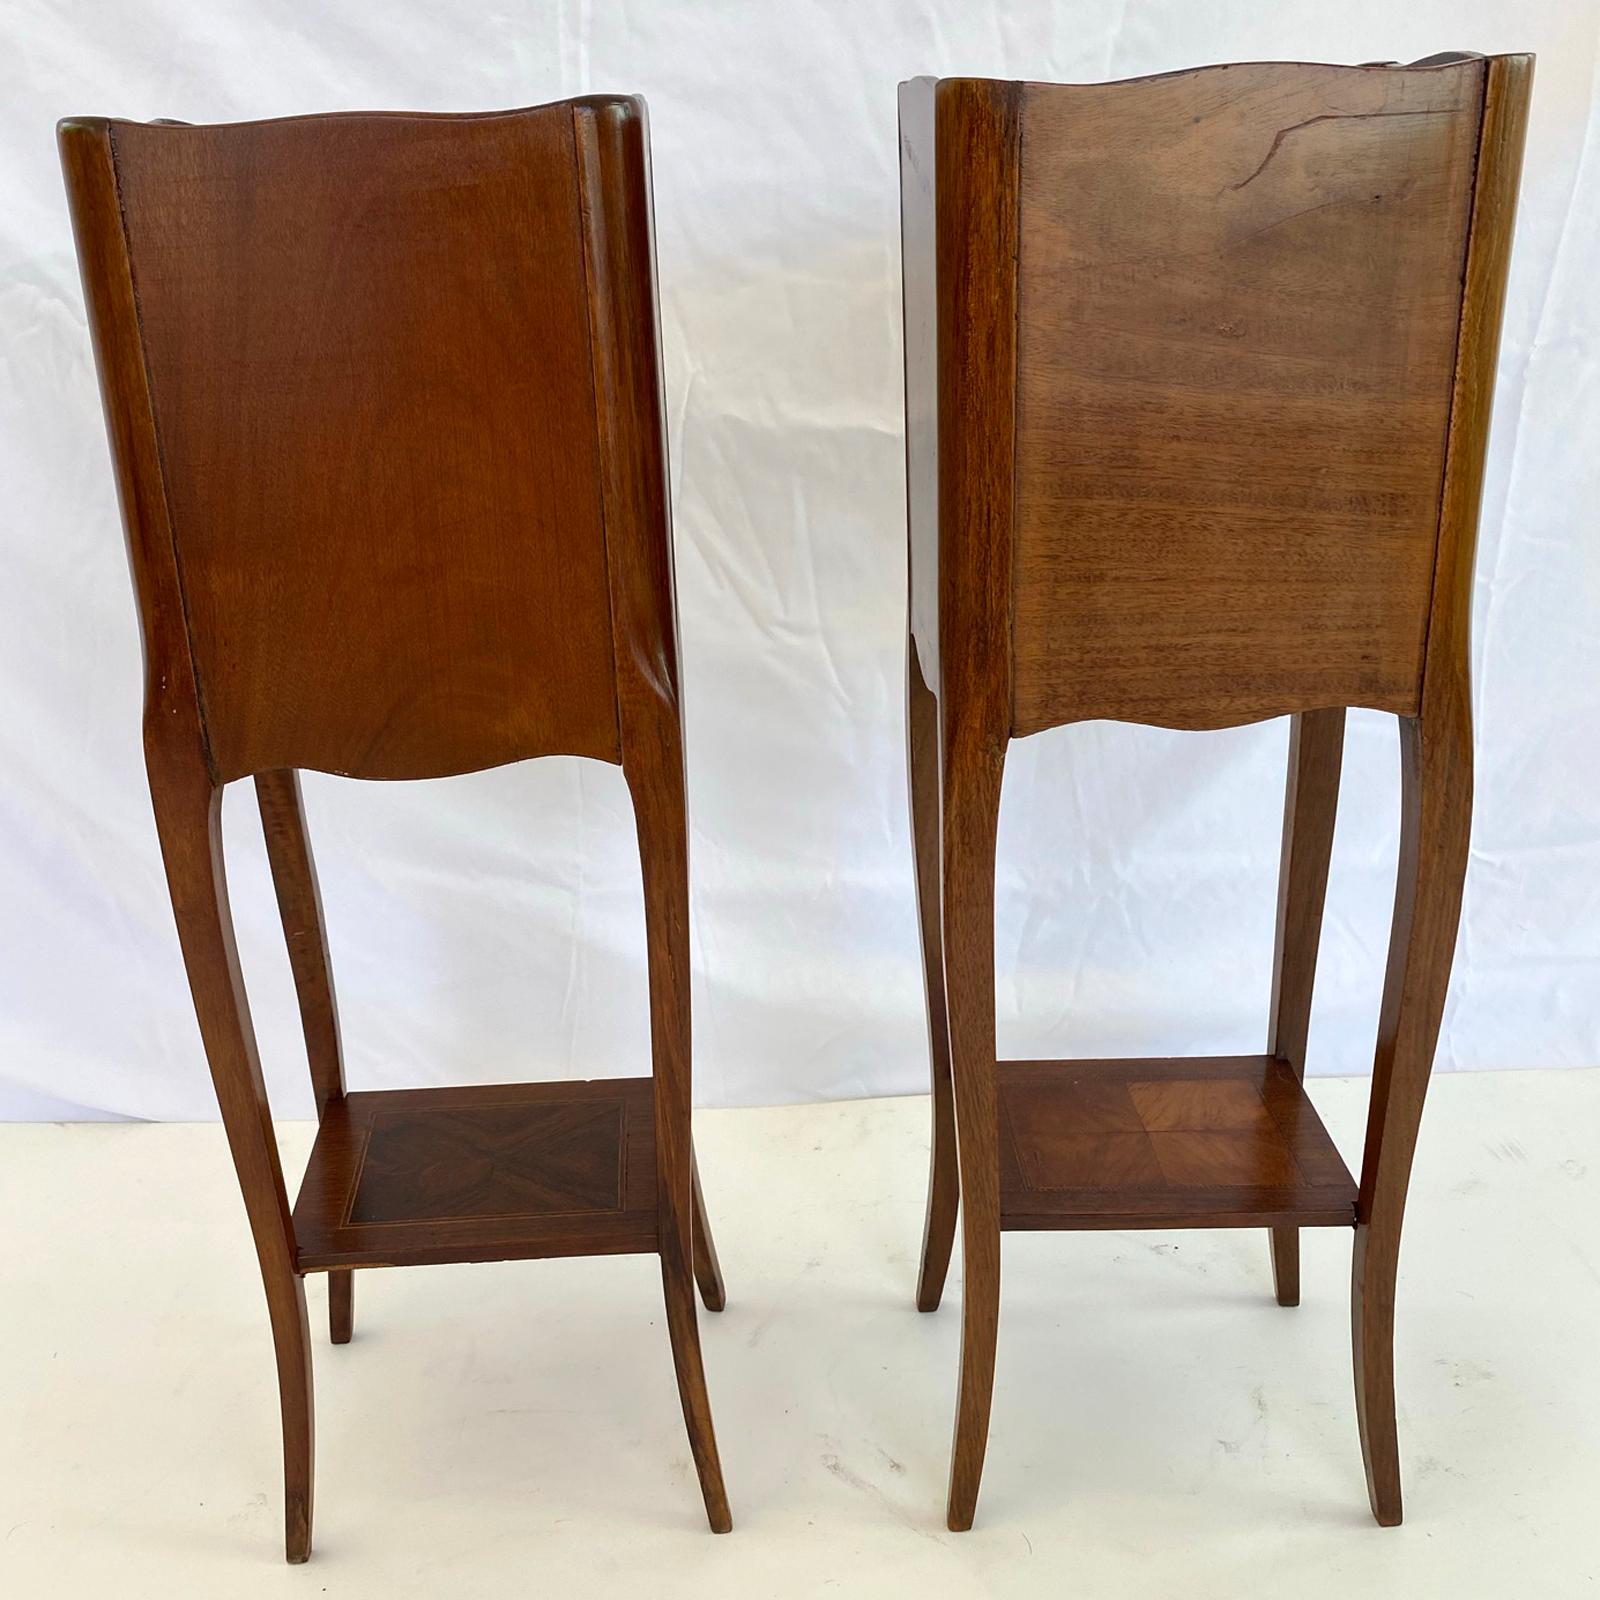 Italian Pair of Petite Inlaid Candlestand Bedside Chests